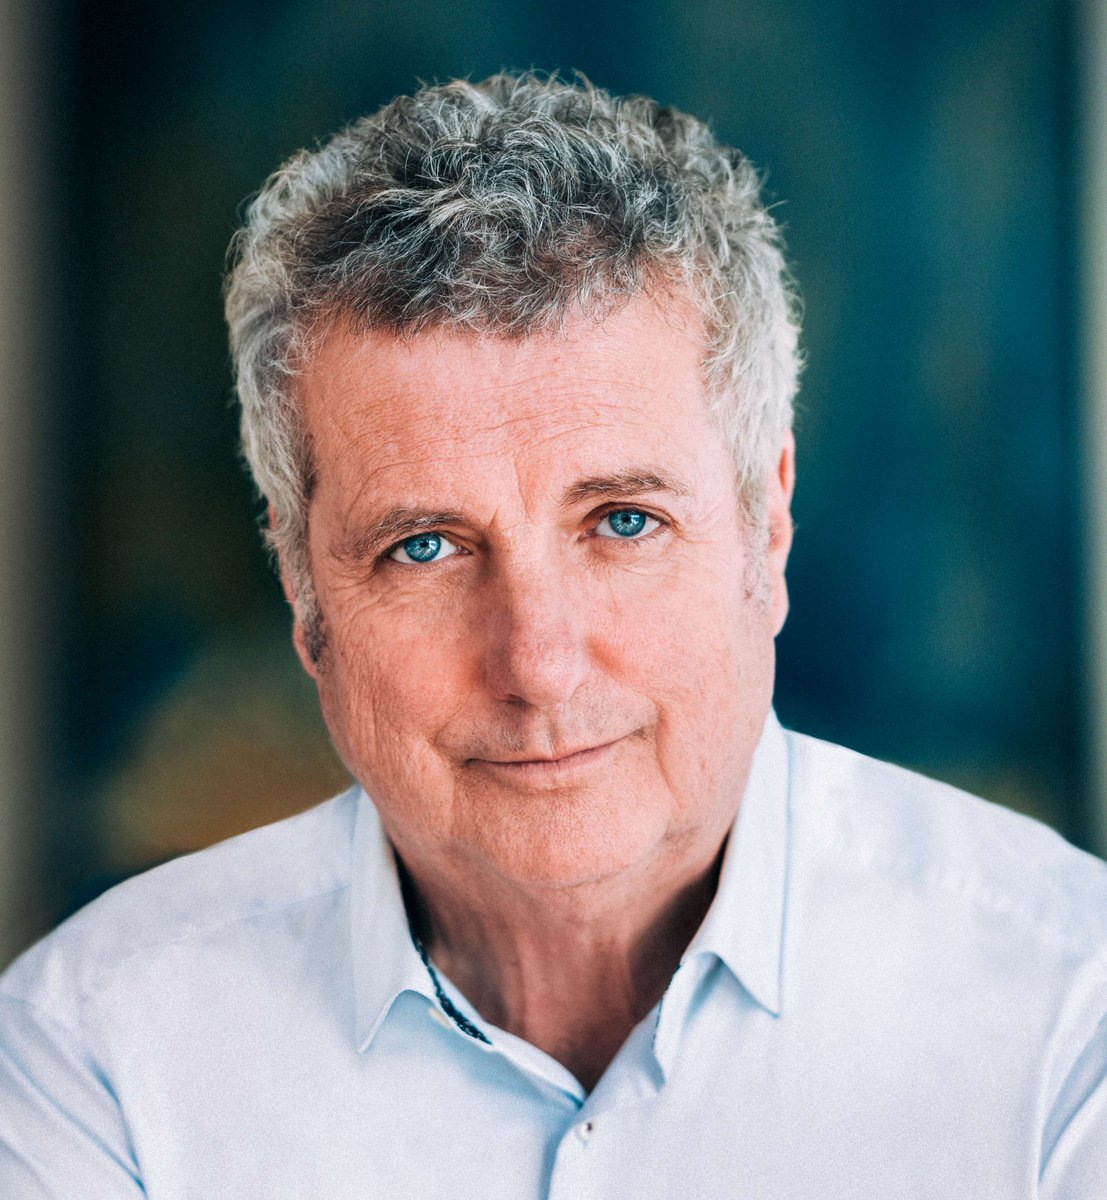 Congratulations to Sylvain Lafrance on his appointment as Chairperson of Telefilm Canada for a term of five years. canada.ca/en/canadian-he… @Telefilm_Canada 📷 Caroline Bergeron